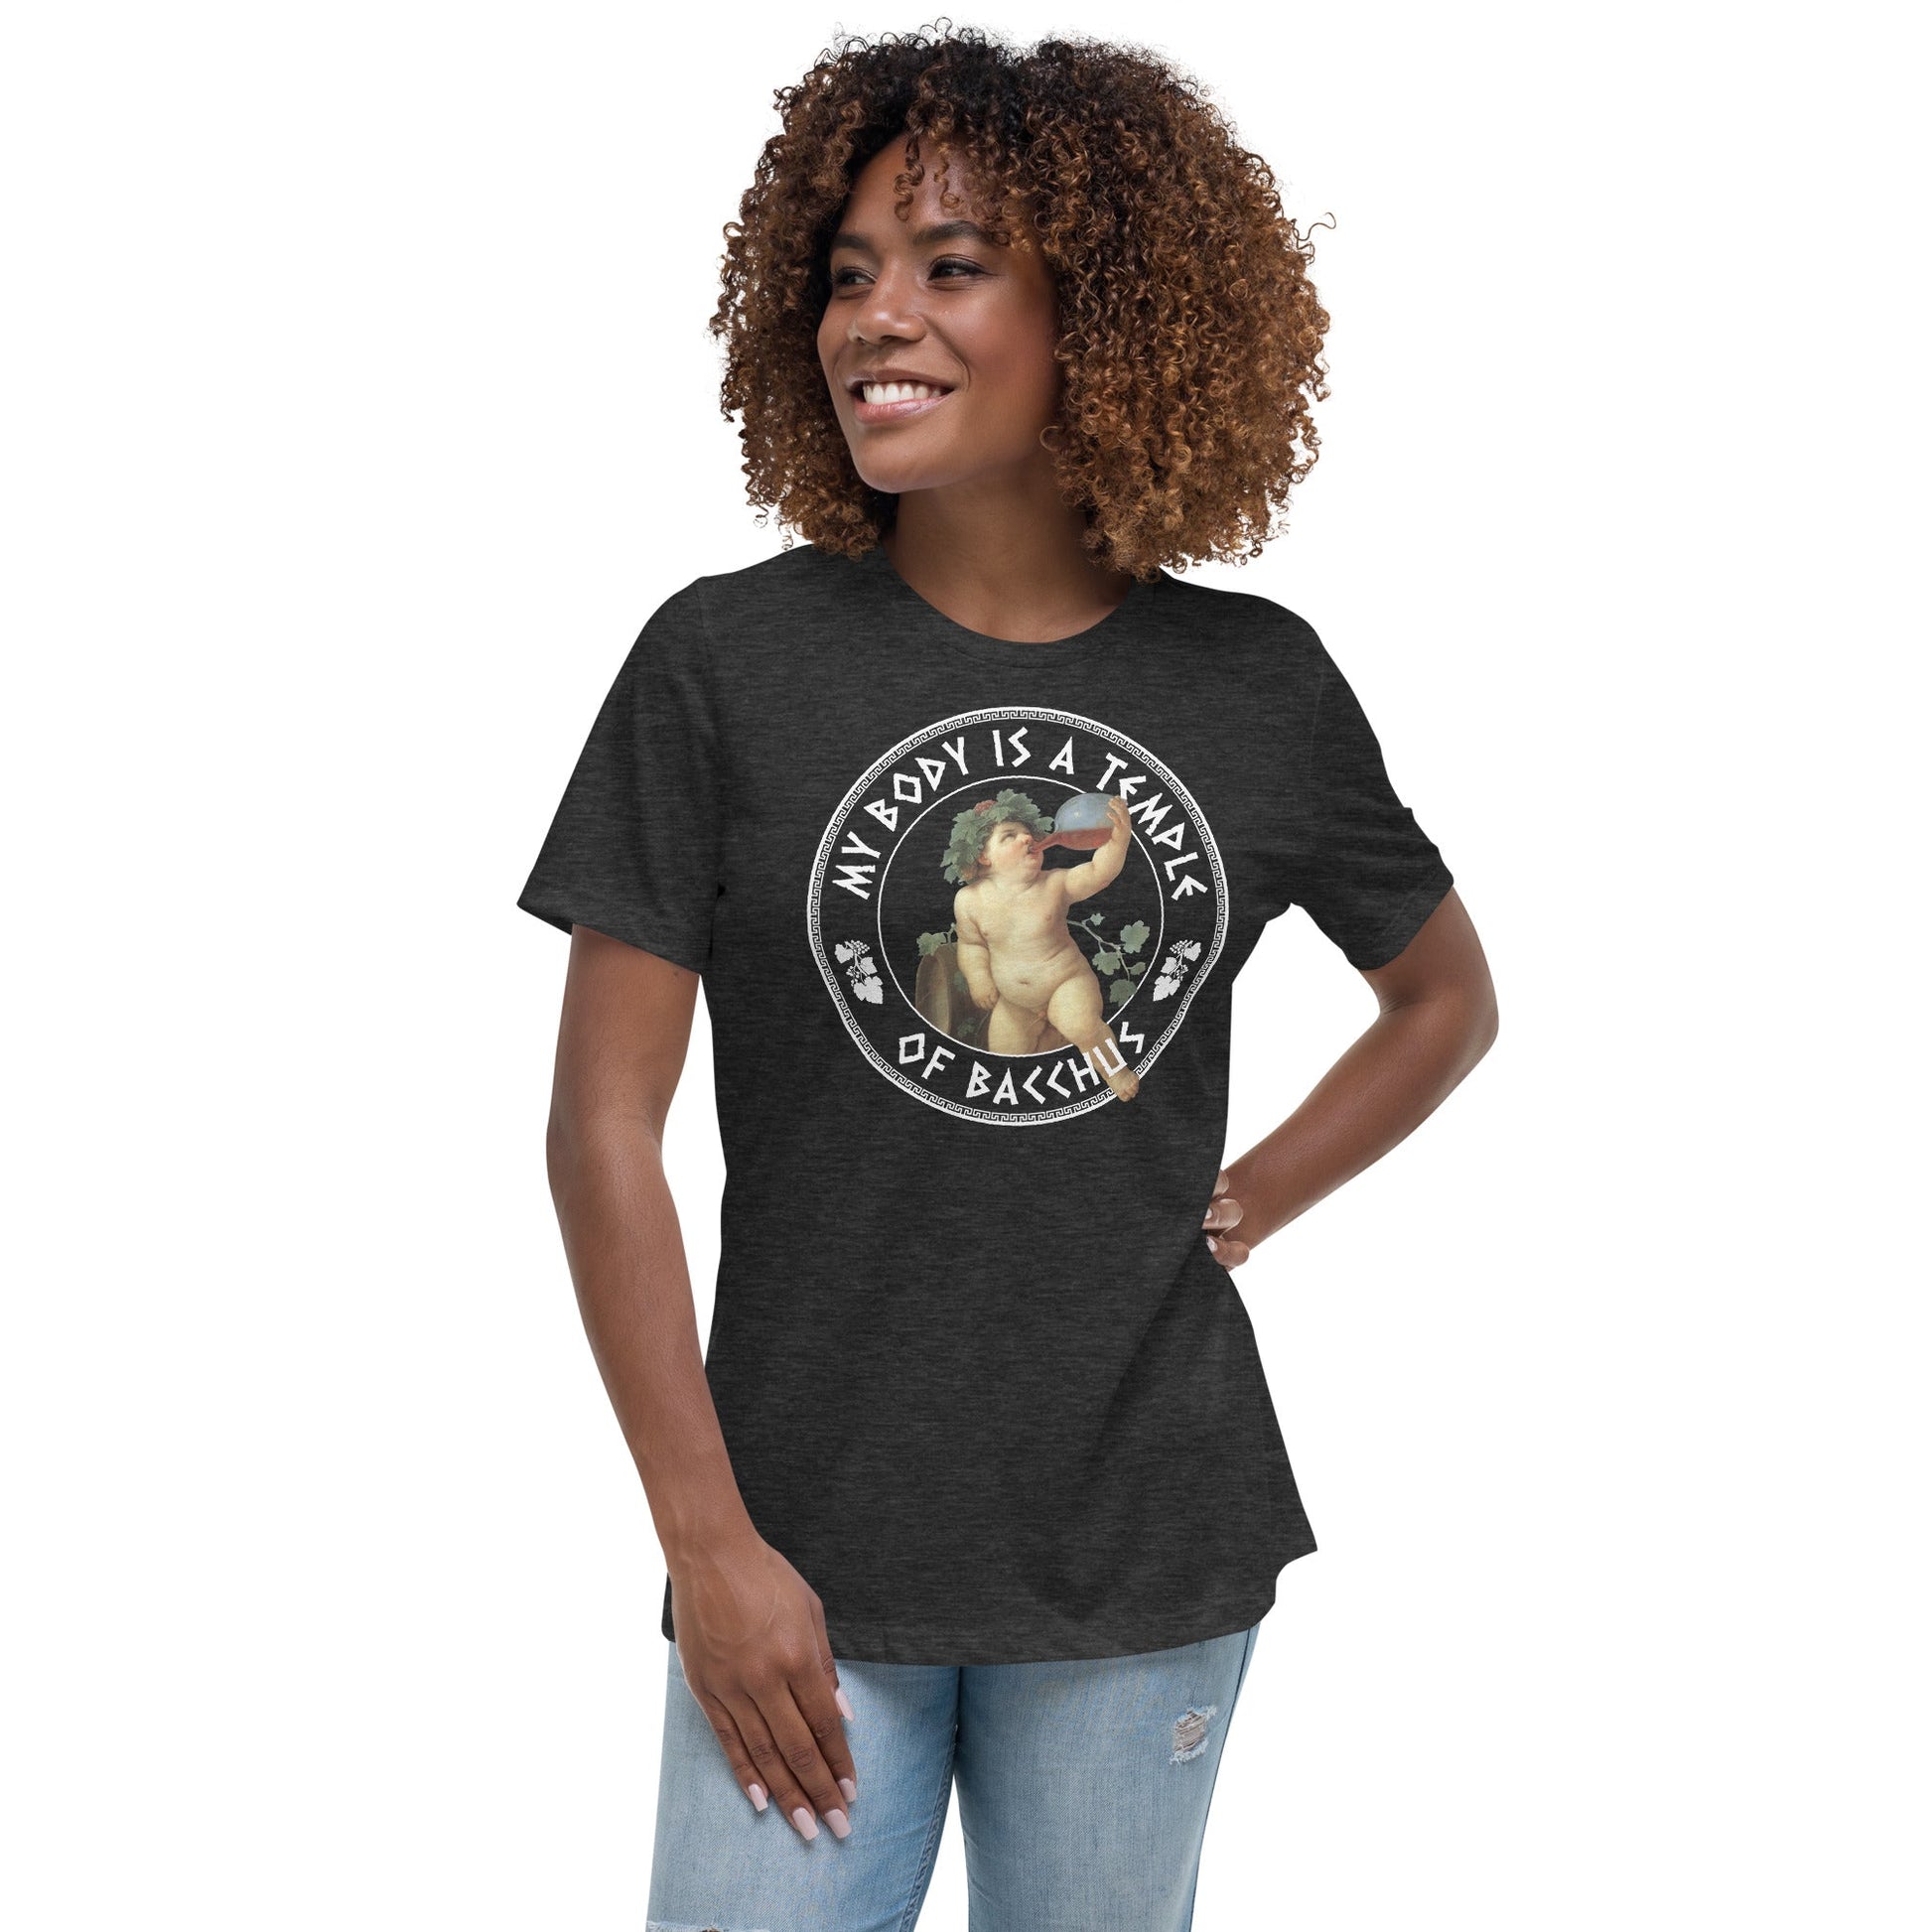 My Body Is A Temple Of Bacchus - Women's T-Shirt